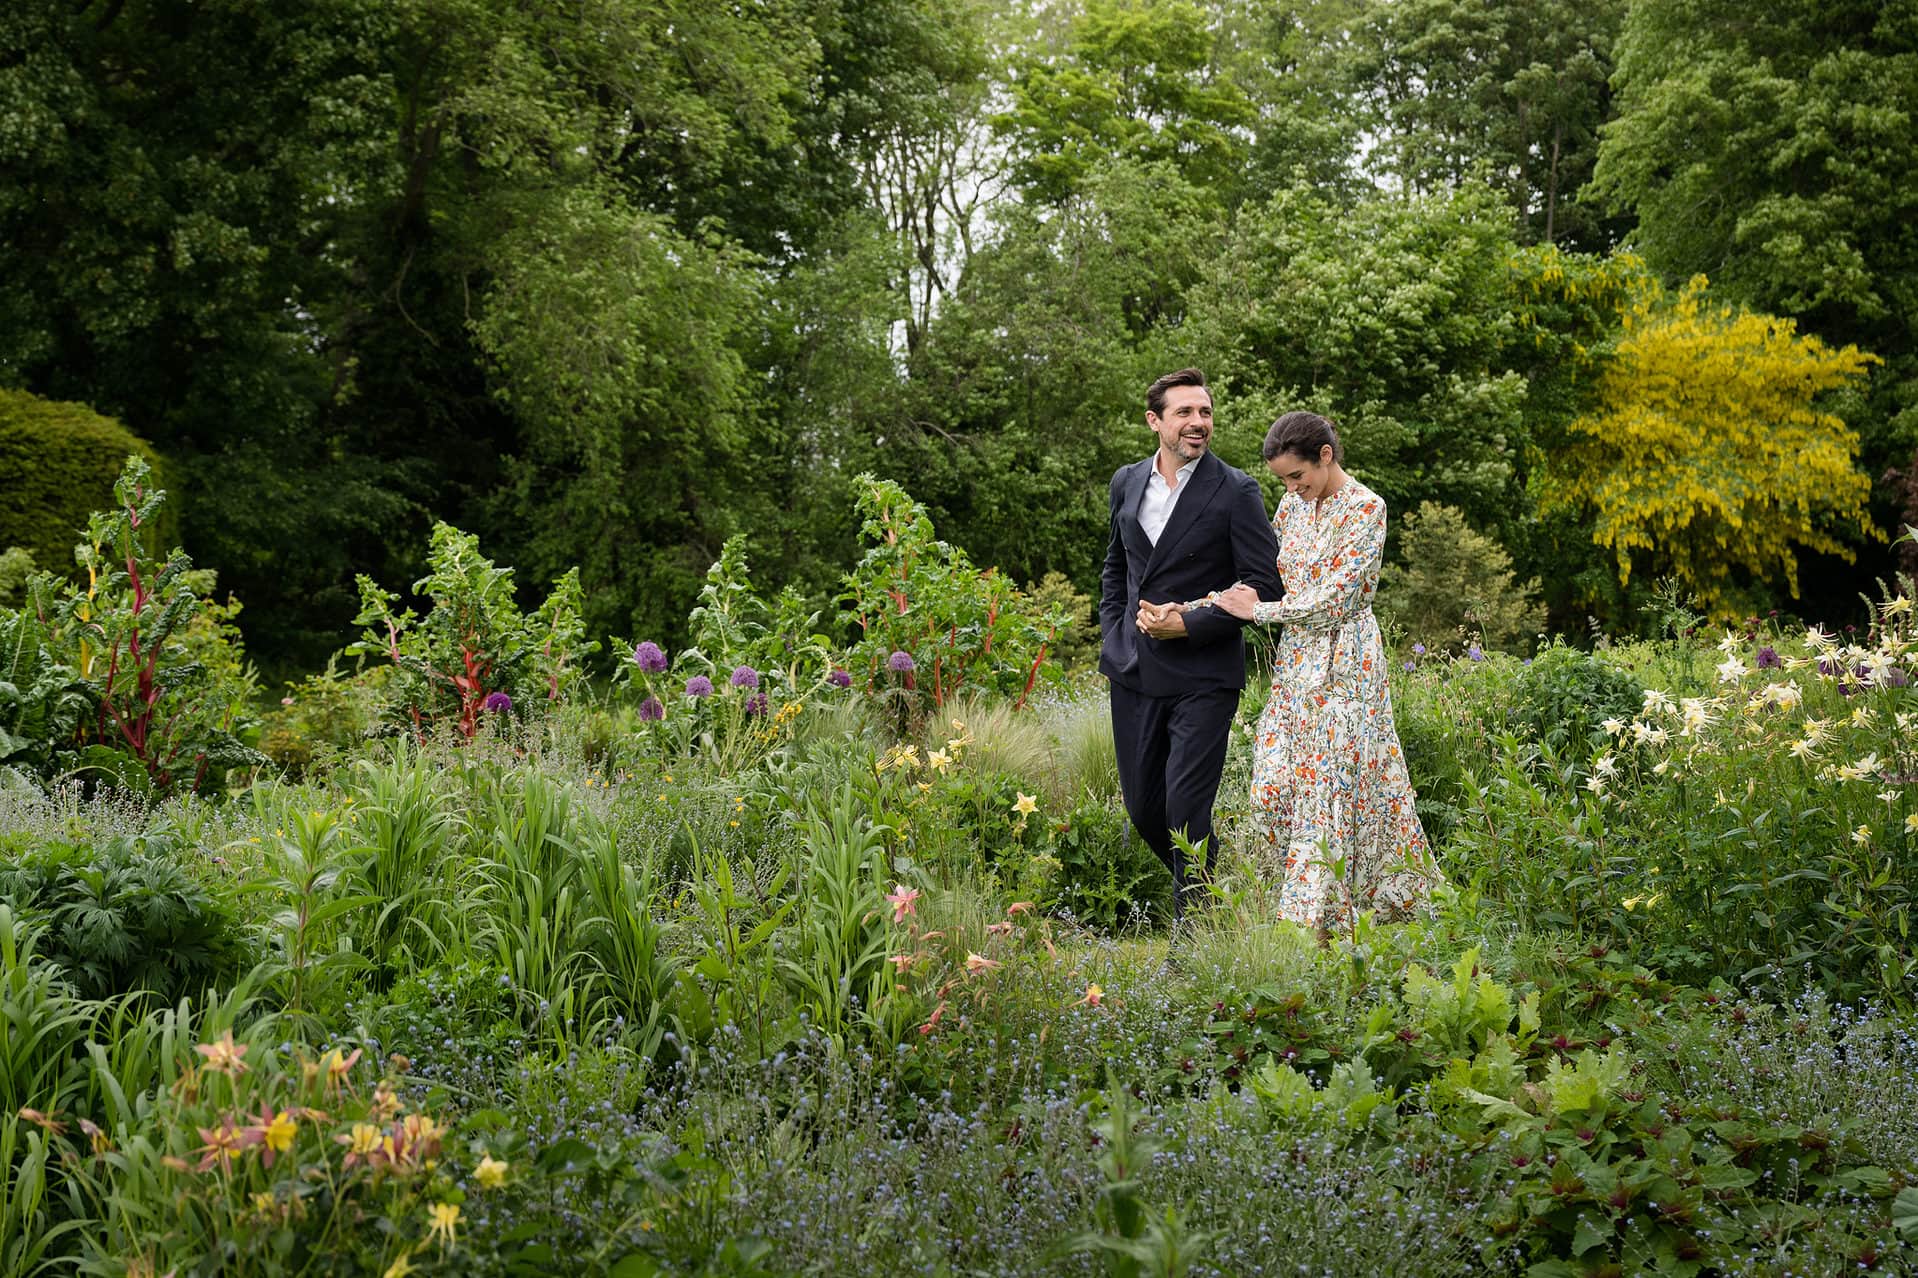 A newly married couple walking arm-in-arm through the flowering gardens at Keythorpe Manor